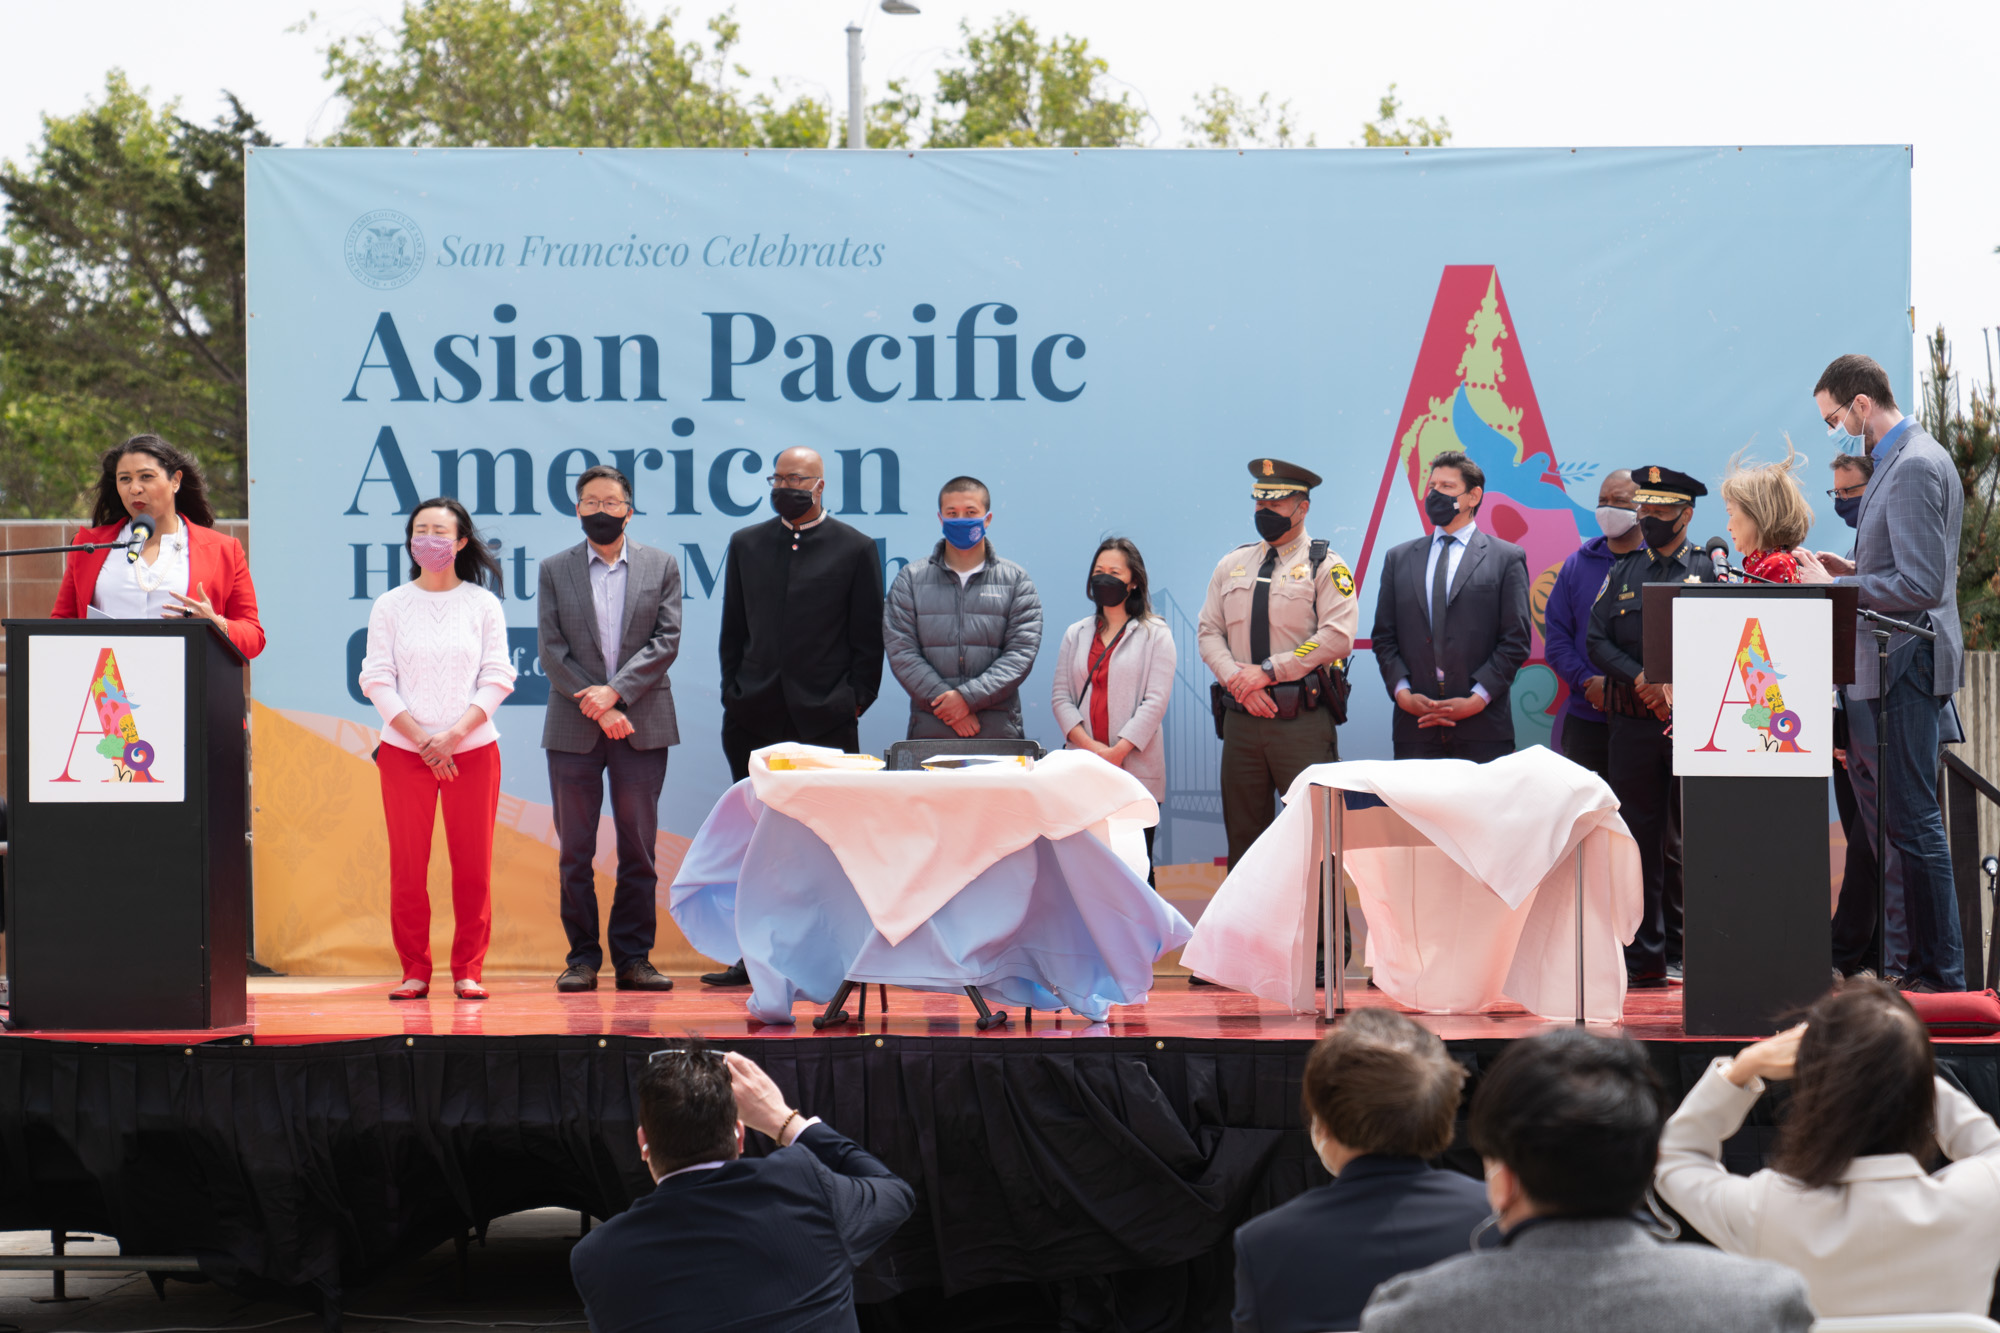 May: SF Celebrates Asian Pacific American Heritage Month